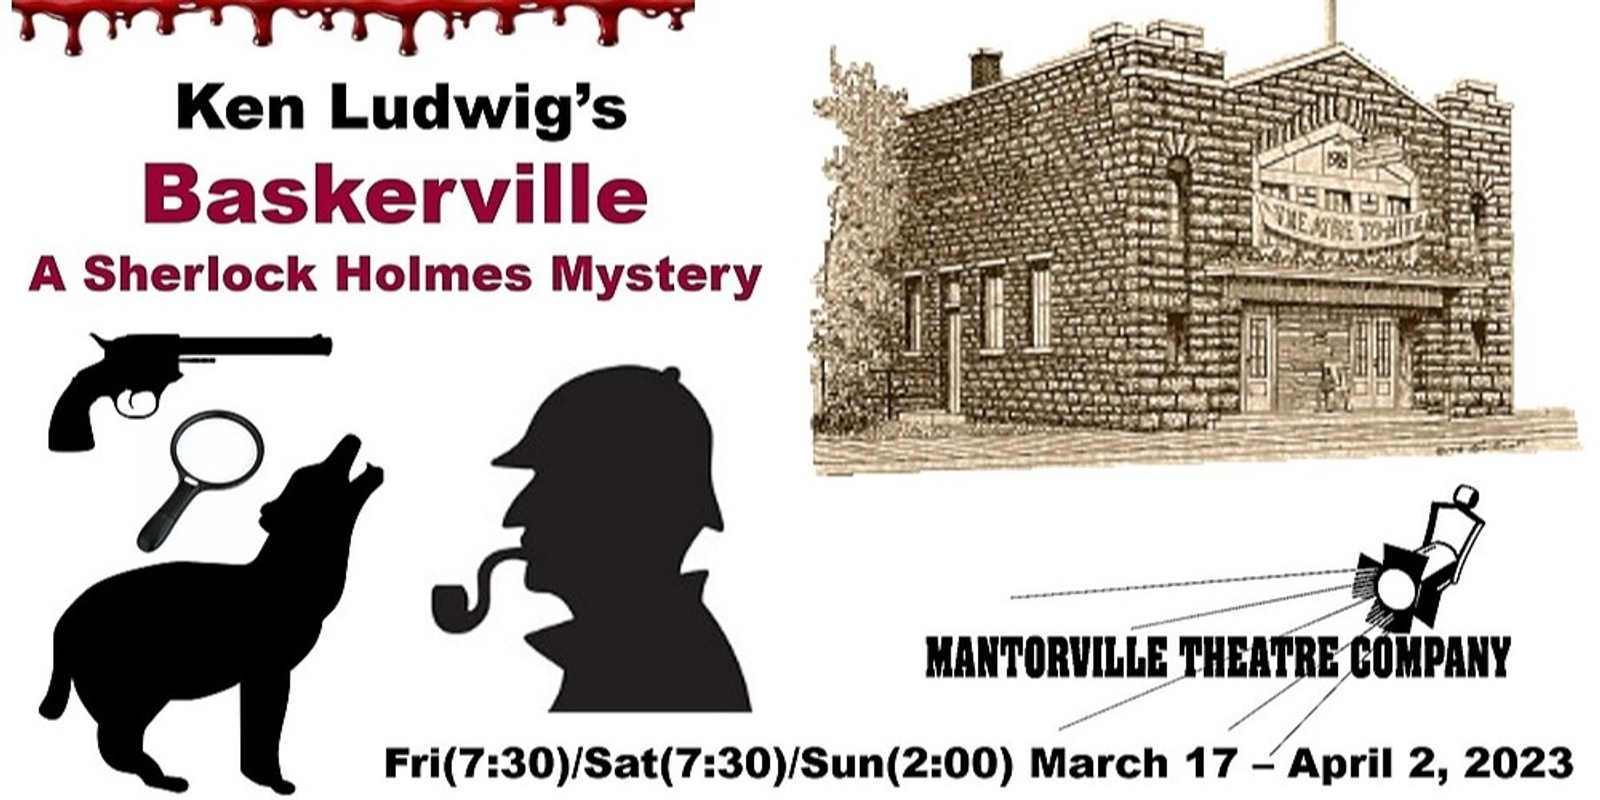 Baskerville - A Sherlock Holmes Mystery, by Ken Ludwig March 24th 7:30 p.m.